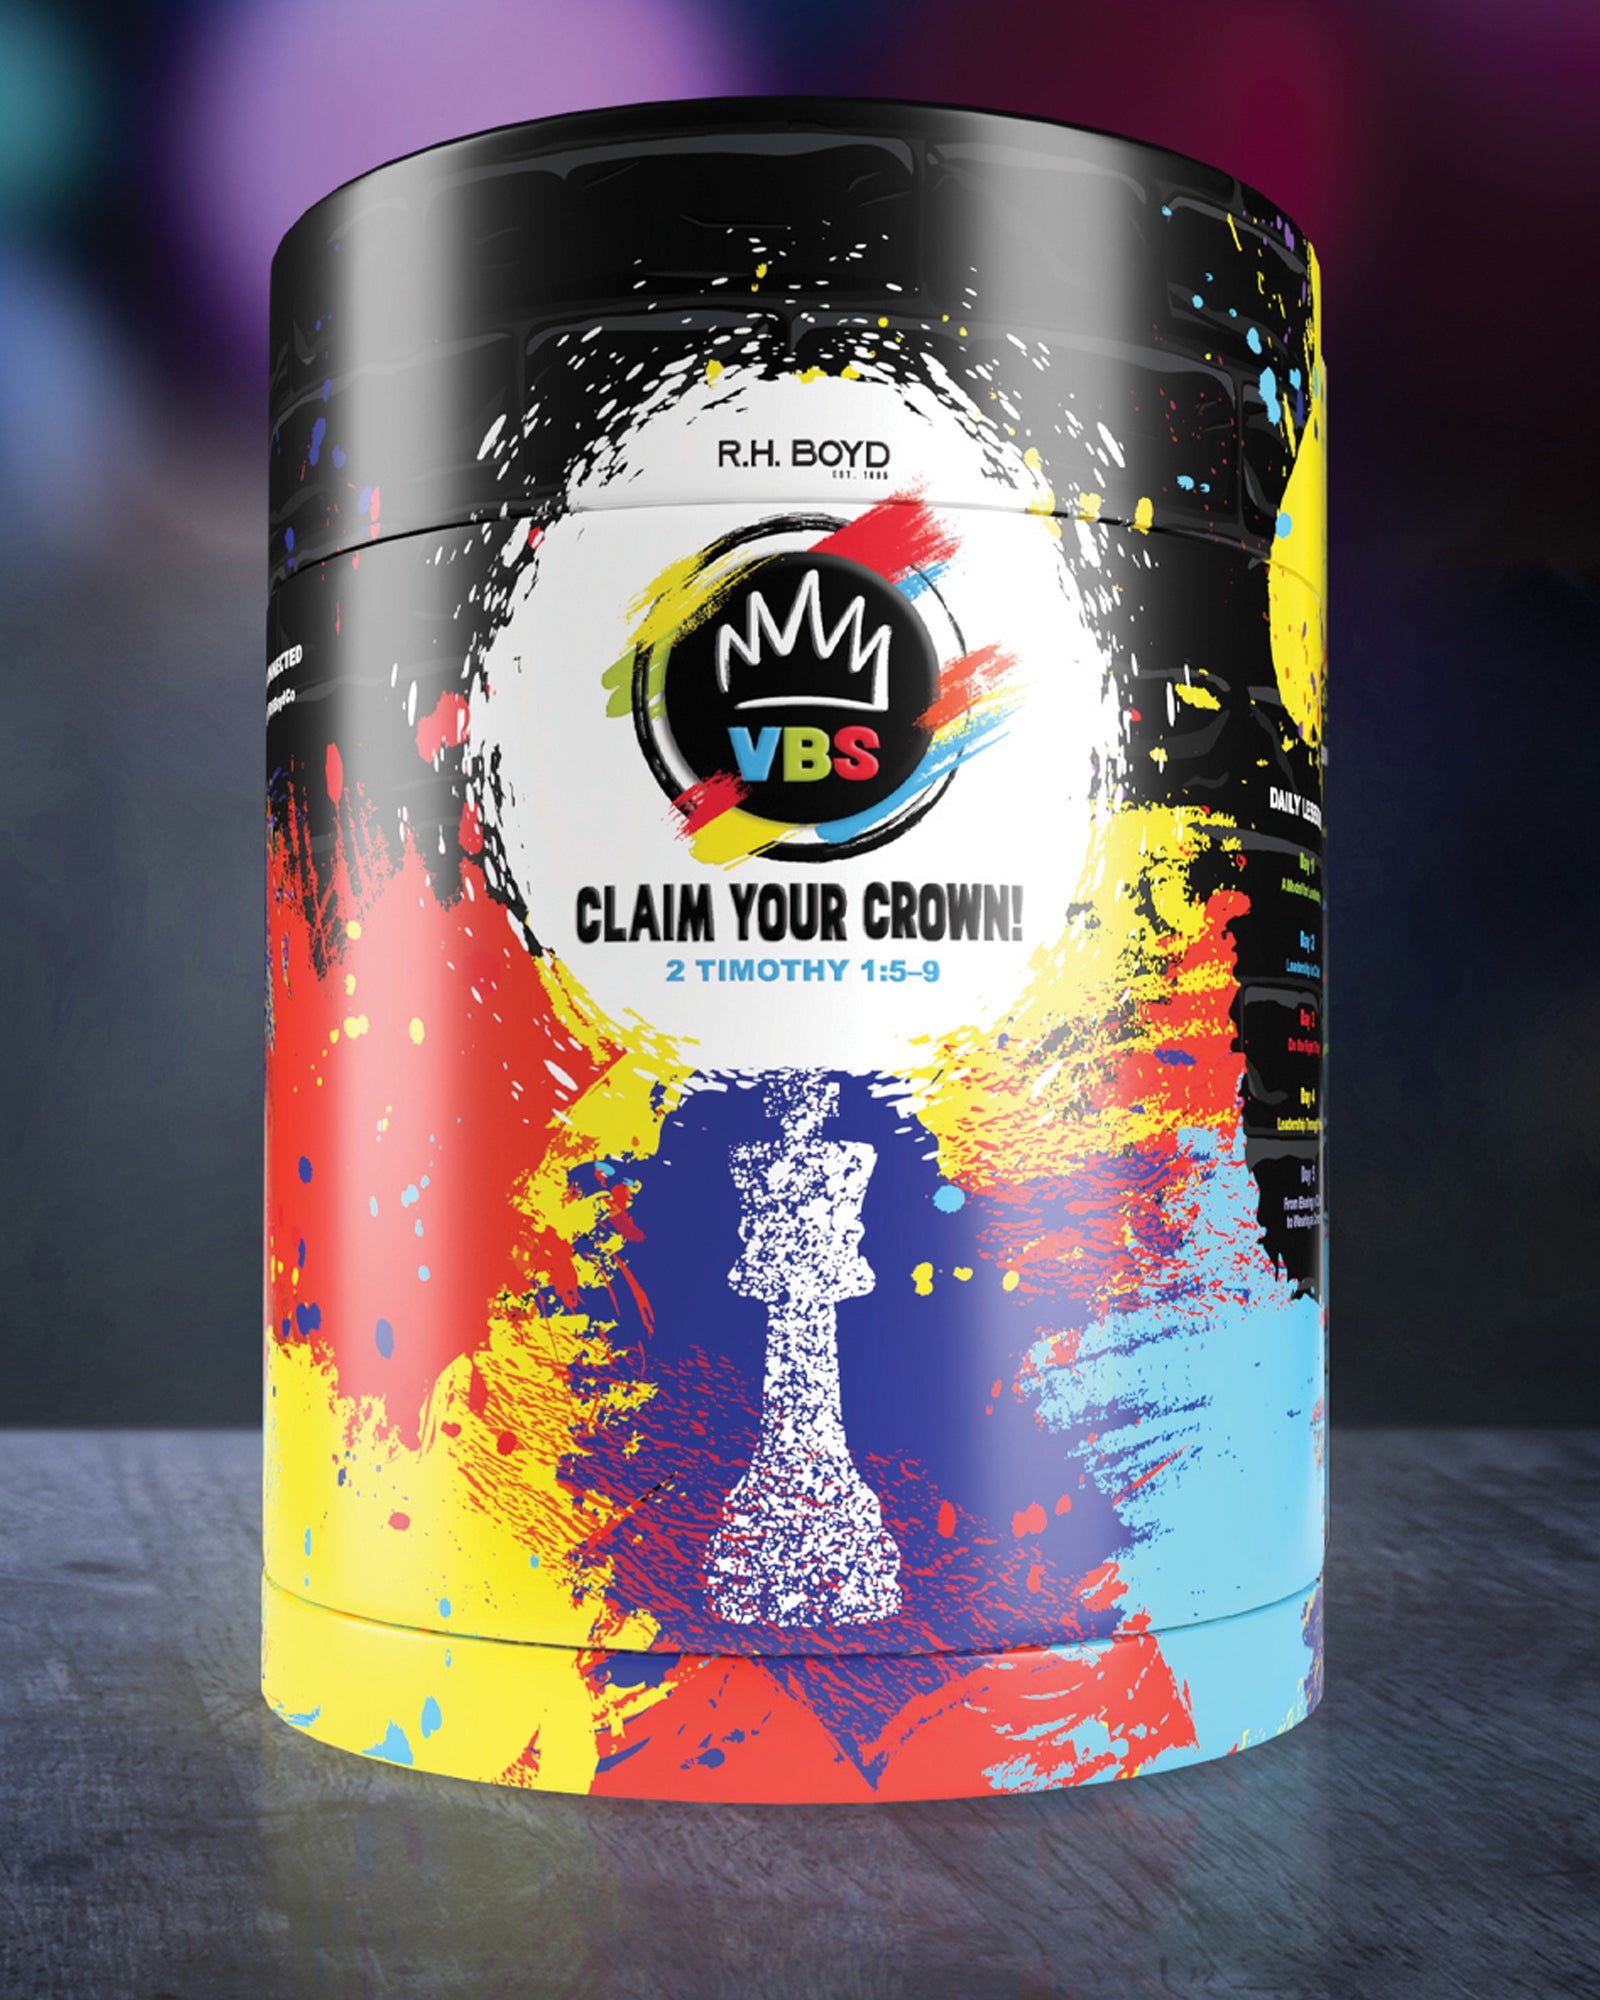 Claim Your Crown! Ultimate VBS Leader Kit